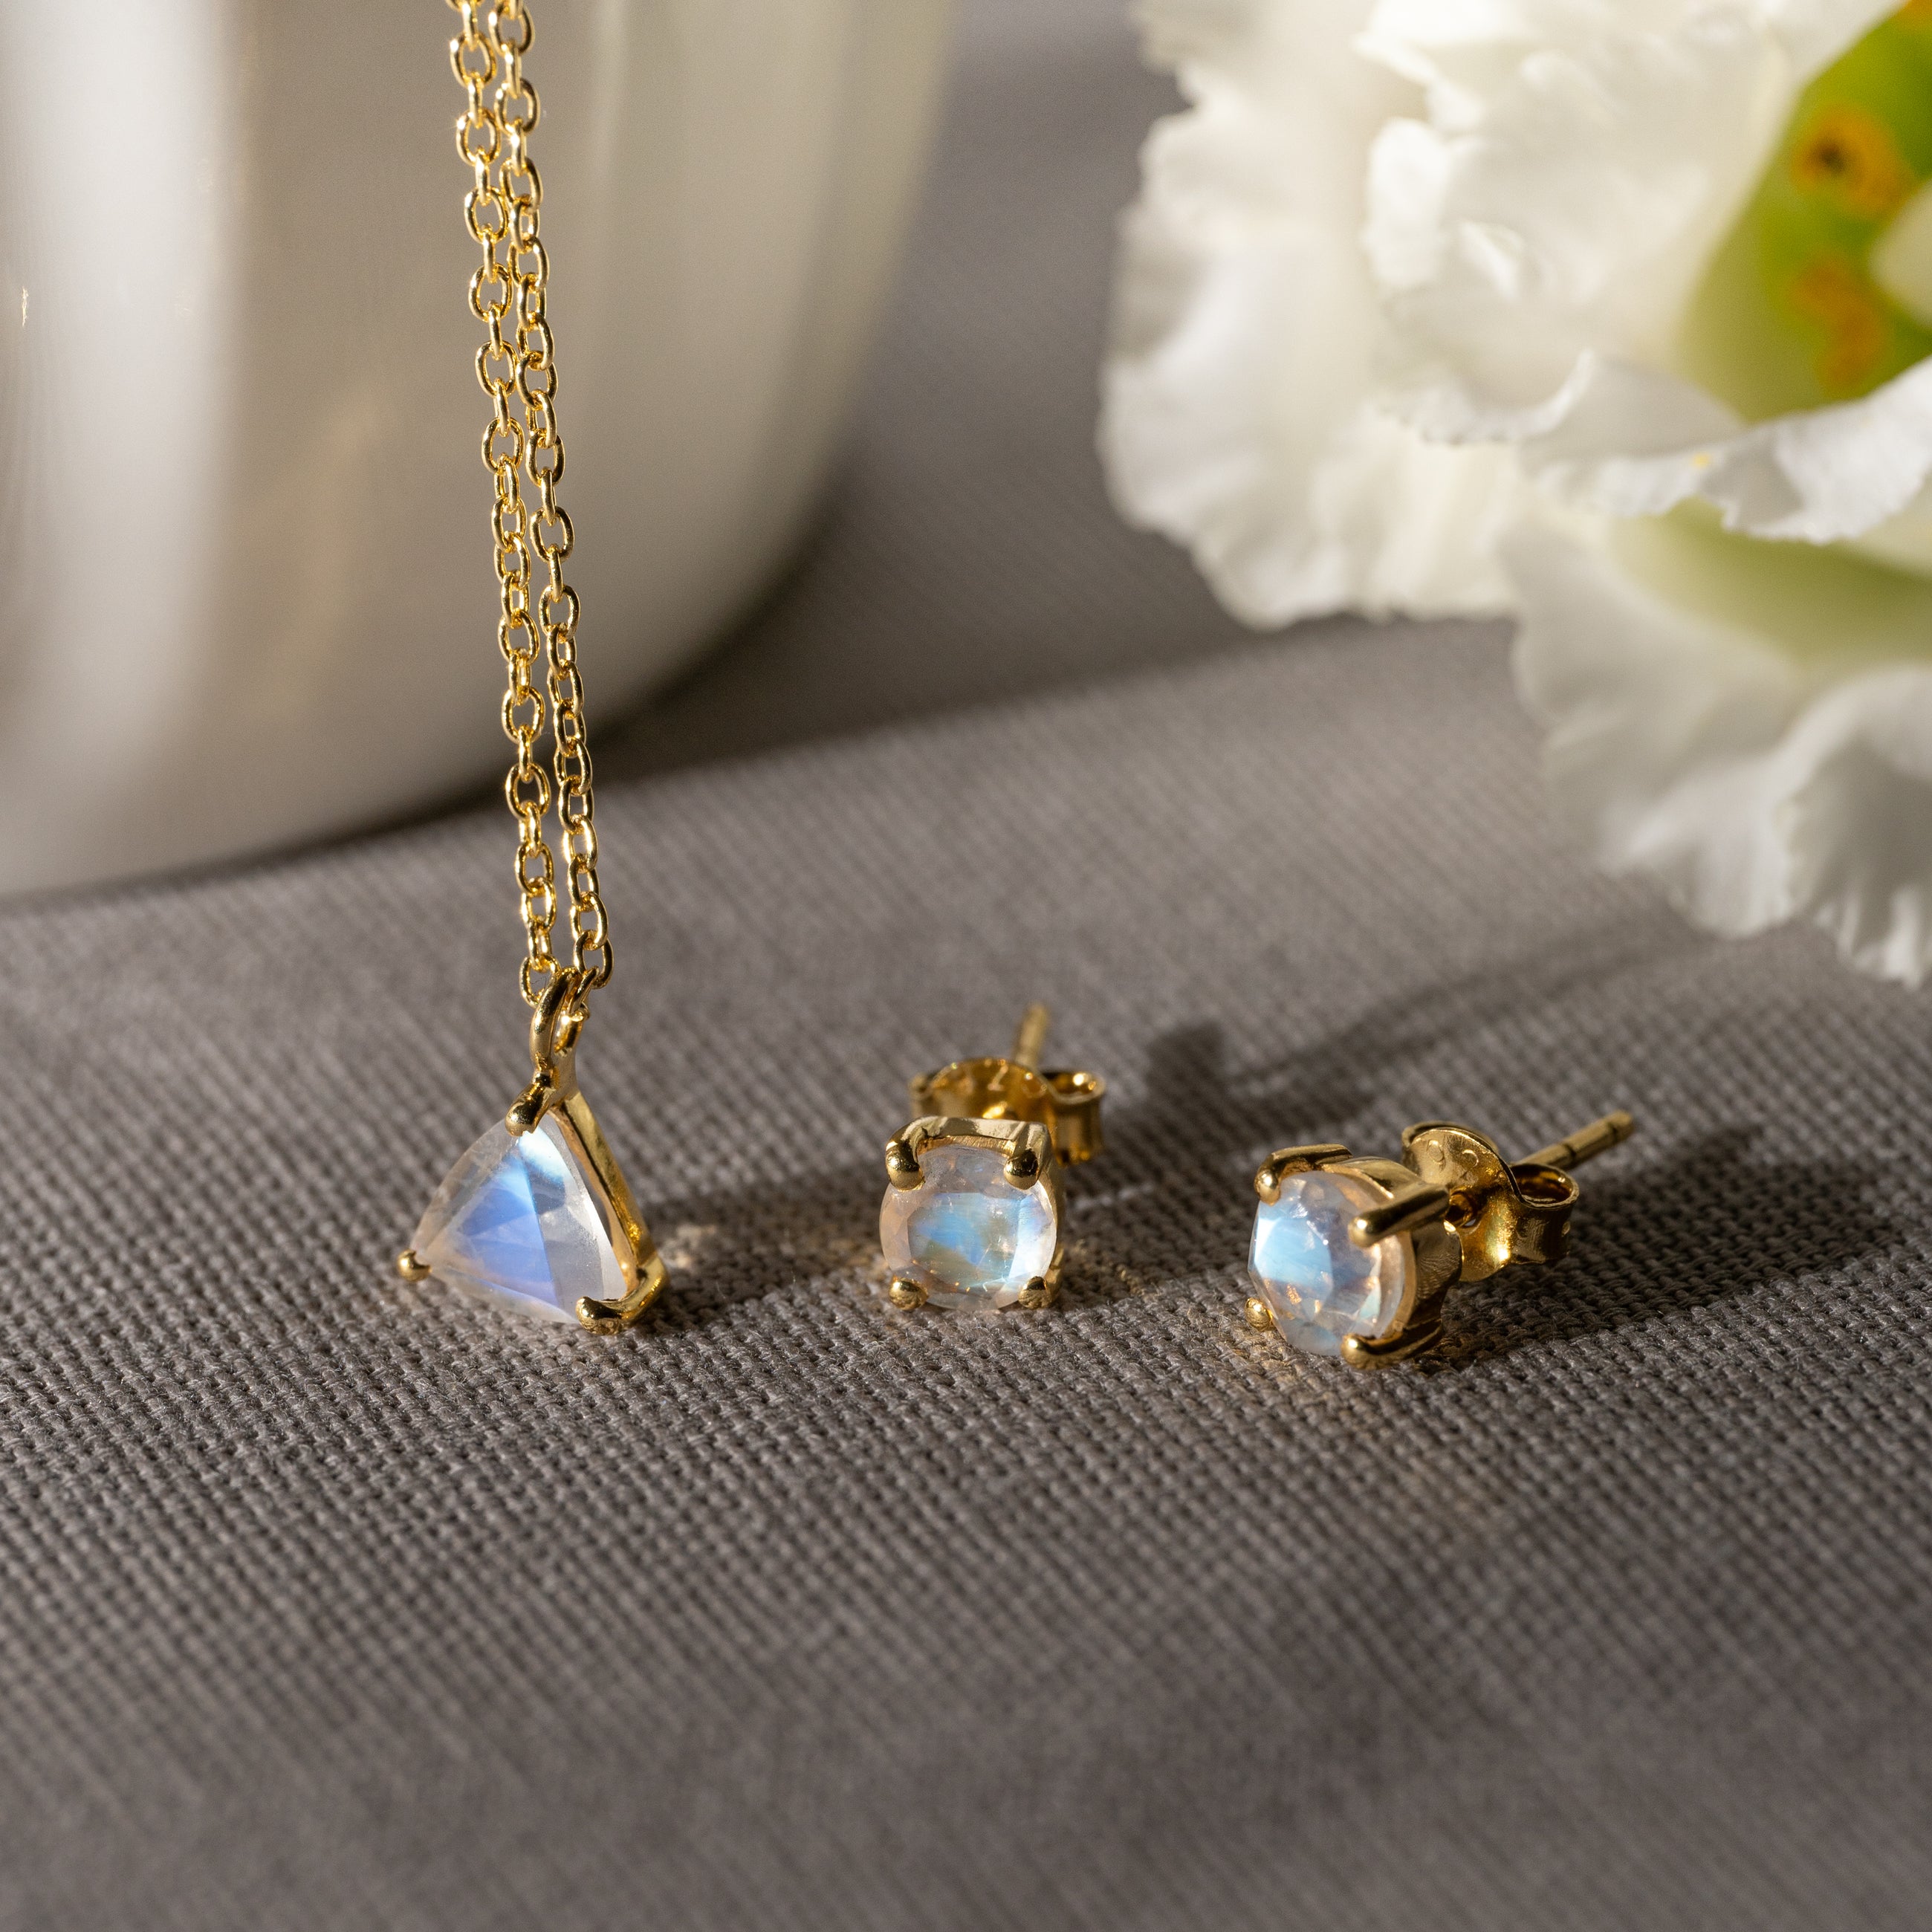 【STAR JEWELRY】 BLUE MOONSTONE NECKLACEイエローゴールド